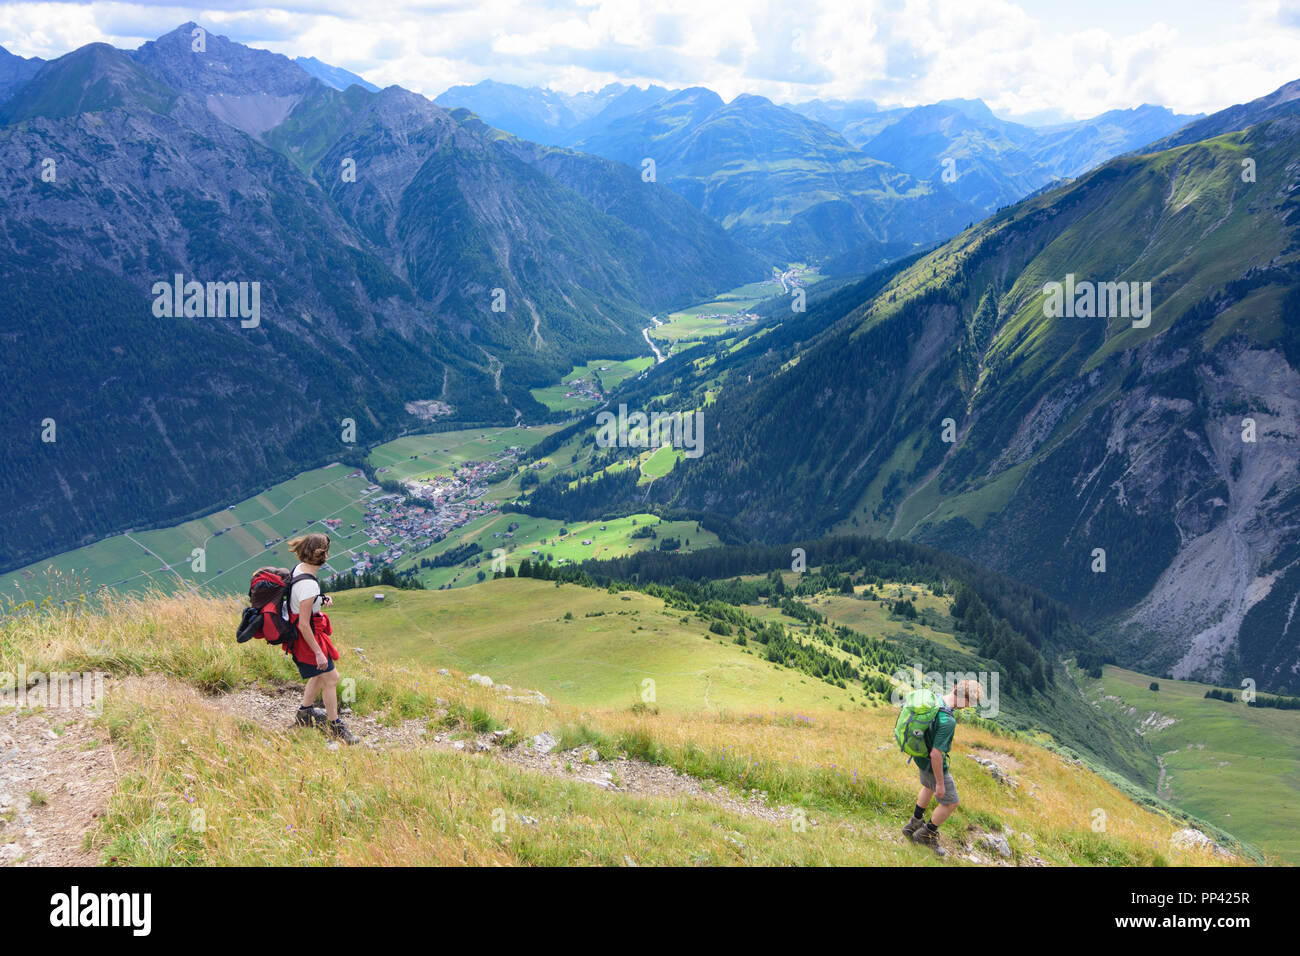 Holzgau: hiker descending to Lechtal (valley of river Lech) and village Holzgau, Lechtal Valley, Tirol, Tyrol, Austria Stock Photo